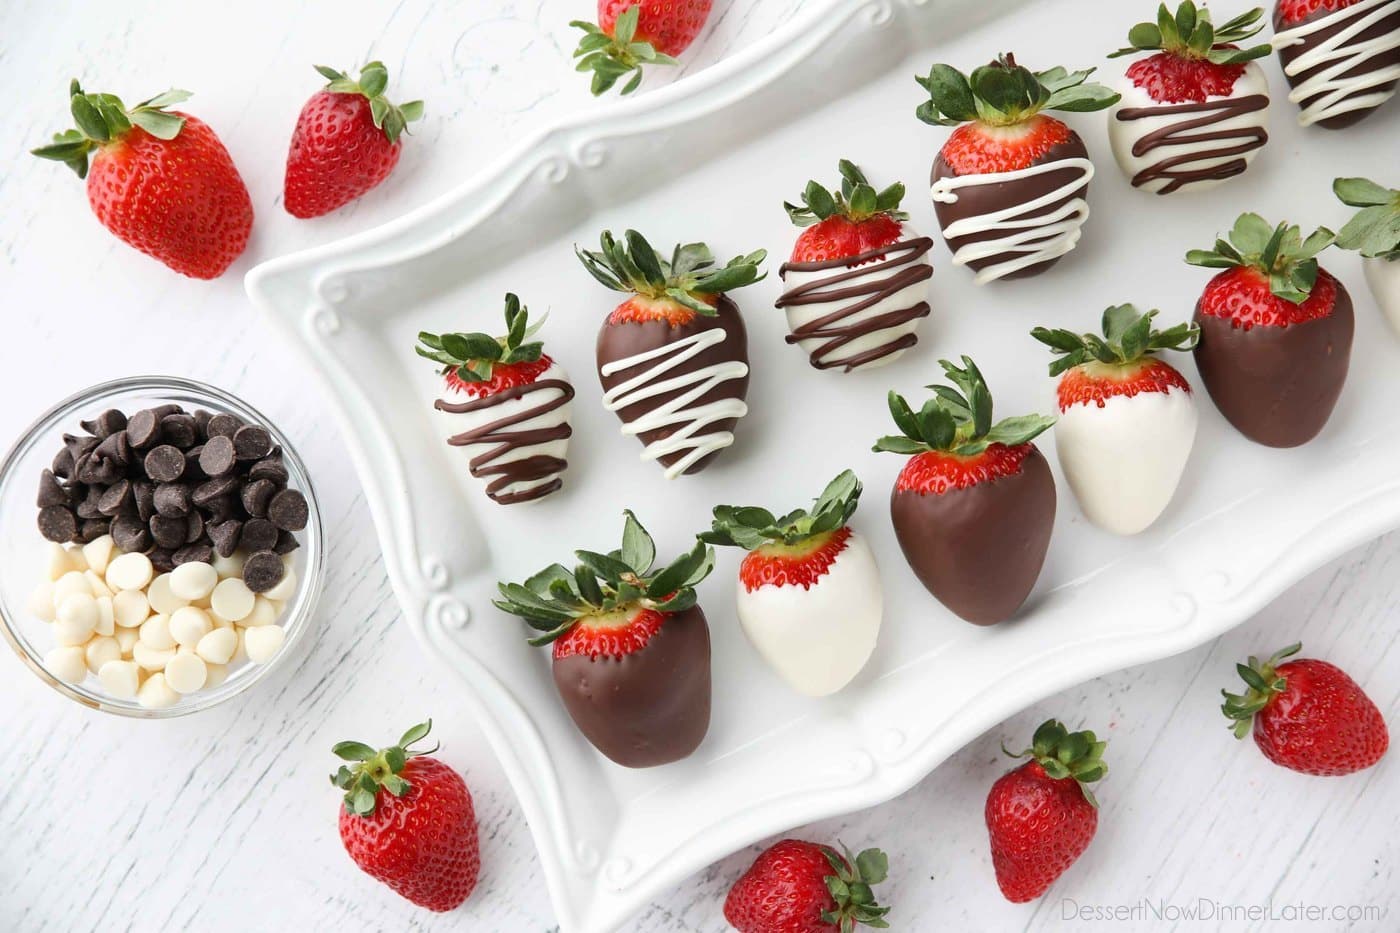 The Best Places for Chocolate Covered Strawberries Near Me